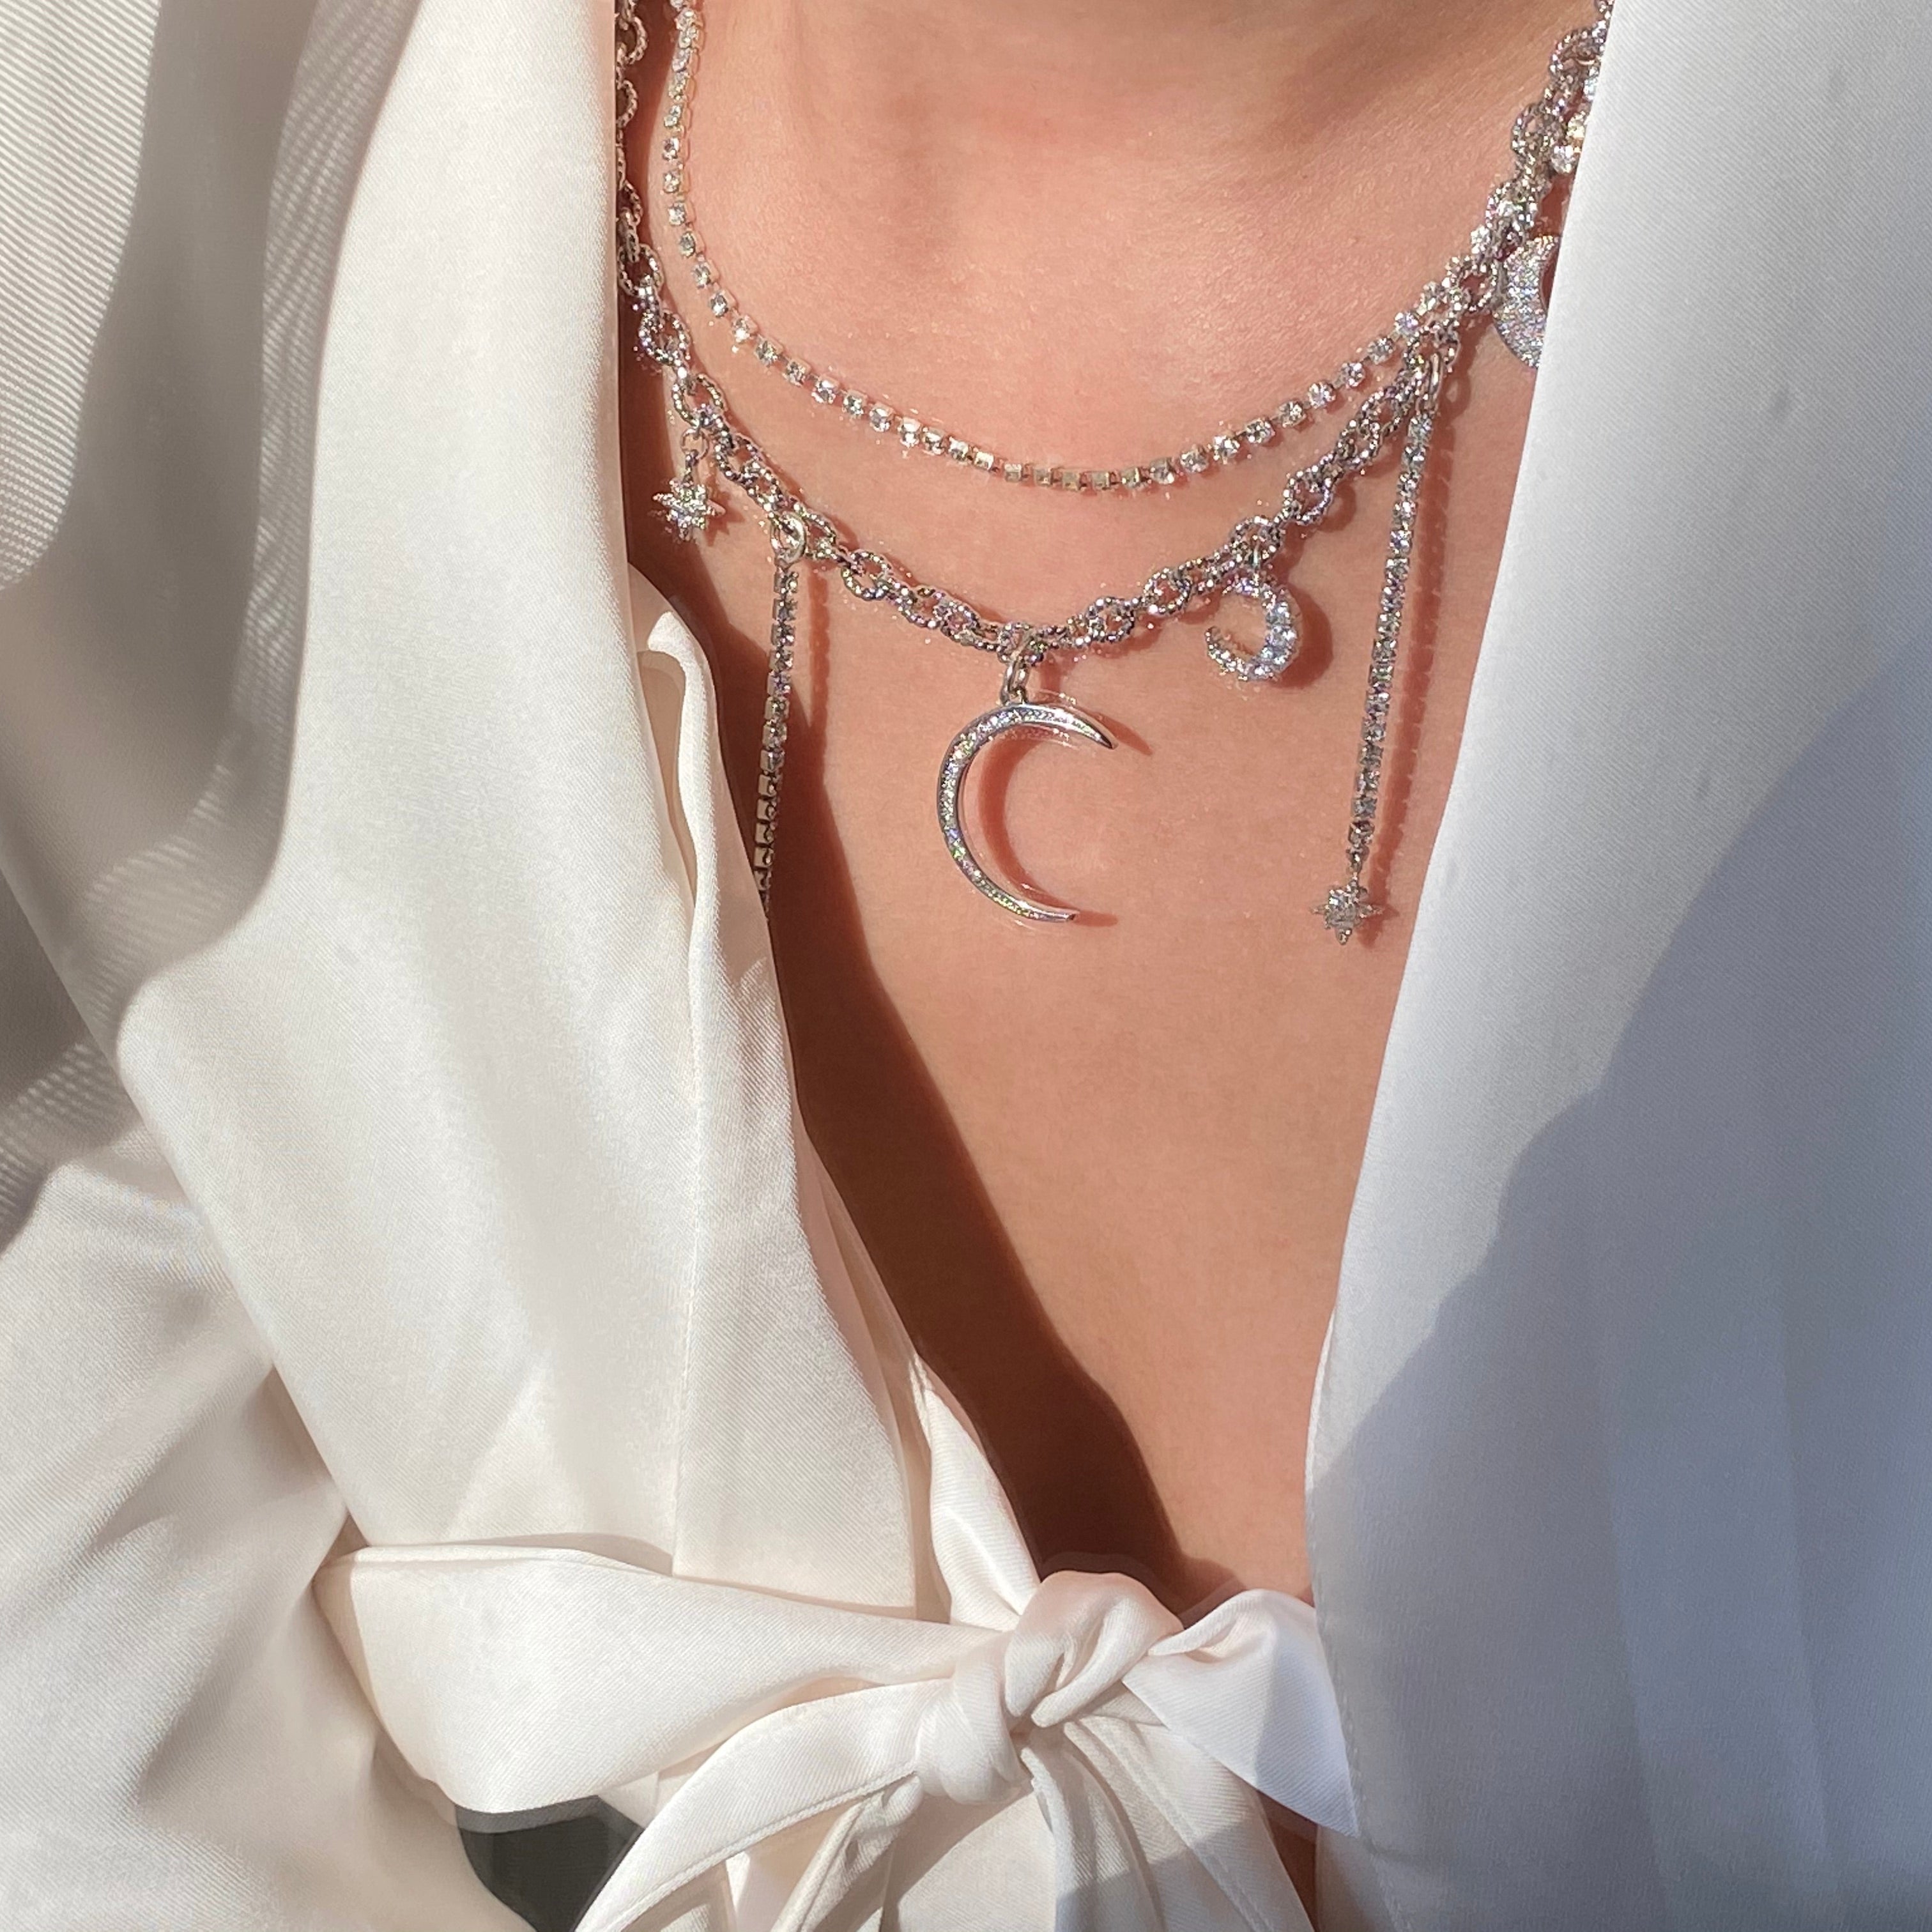 Shiny Star and Moon Double Necklace / Clavicle Handmade Chain